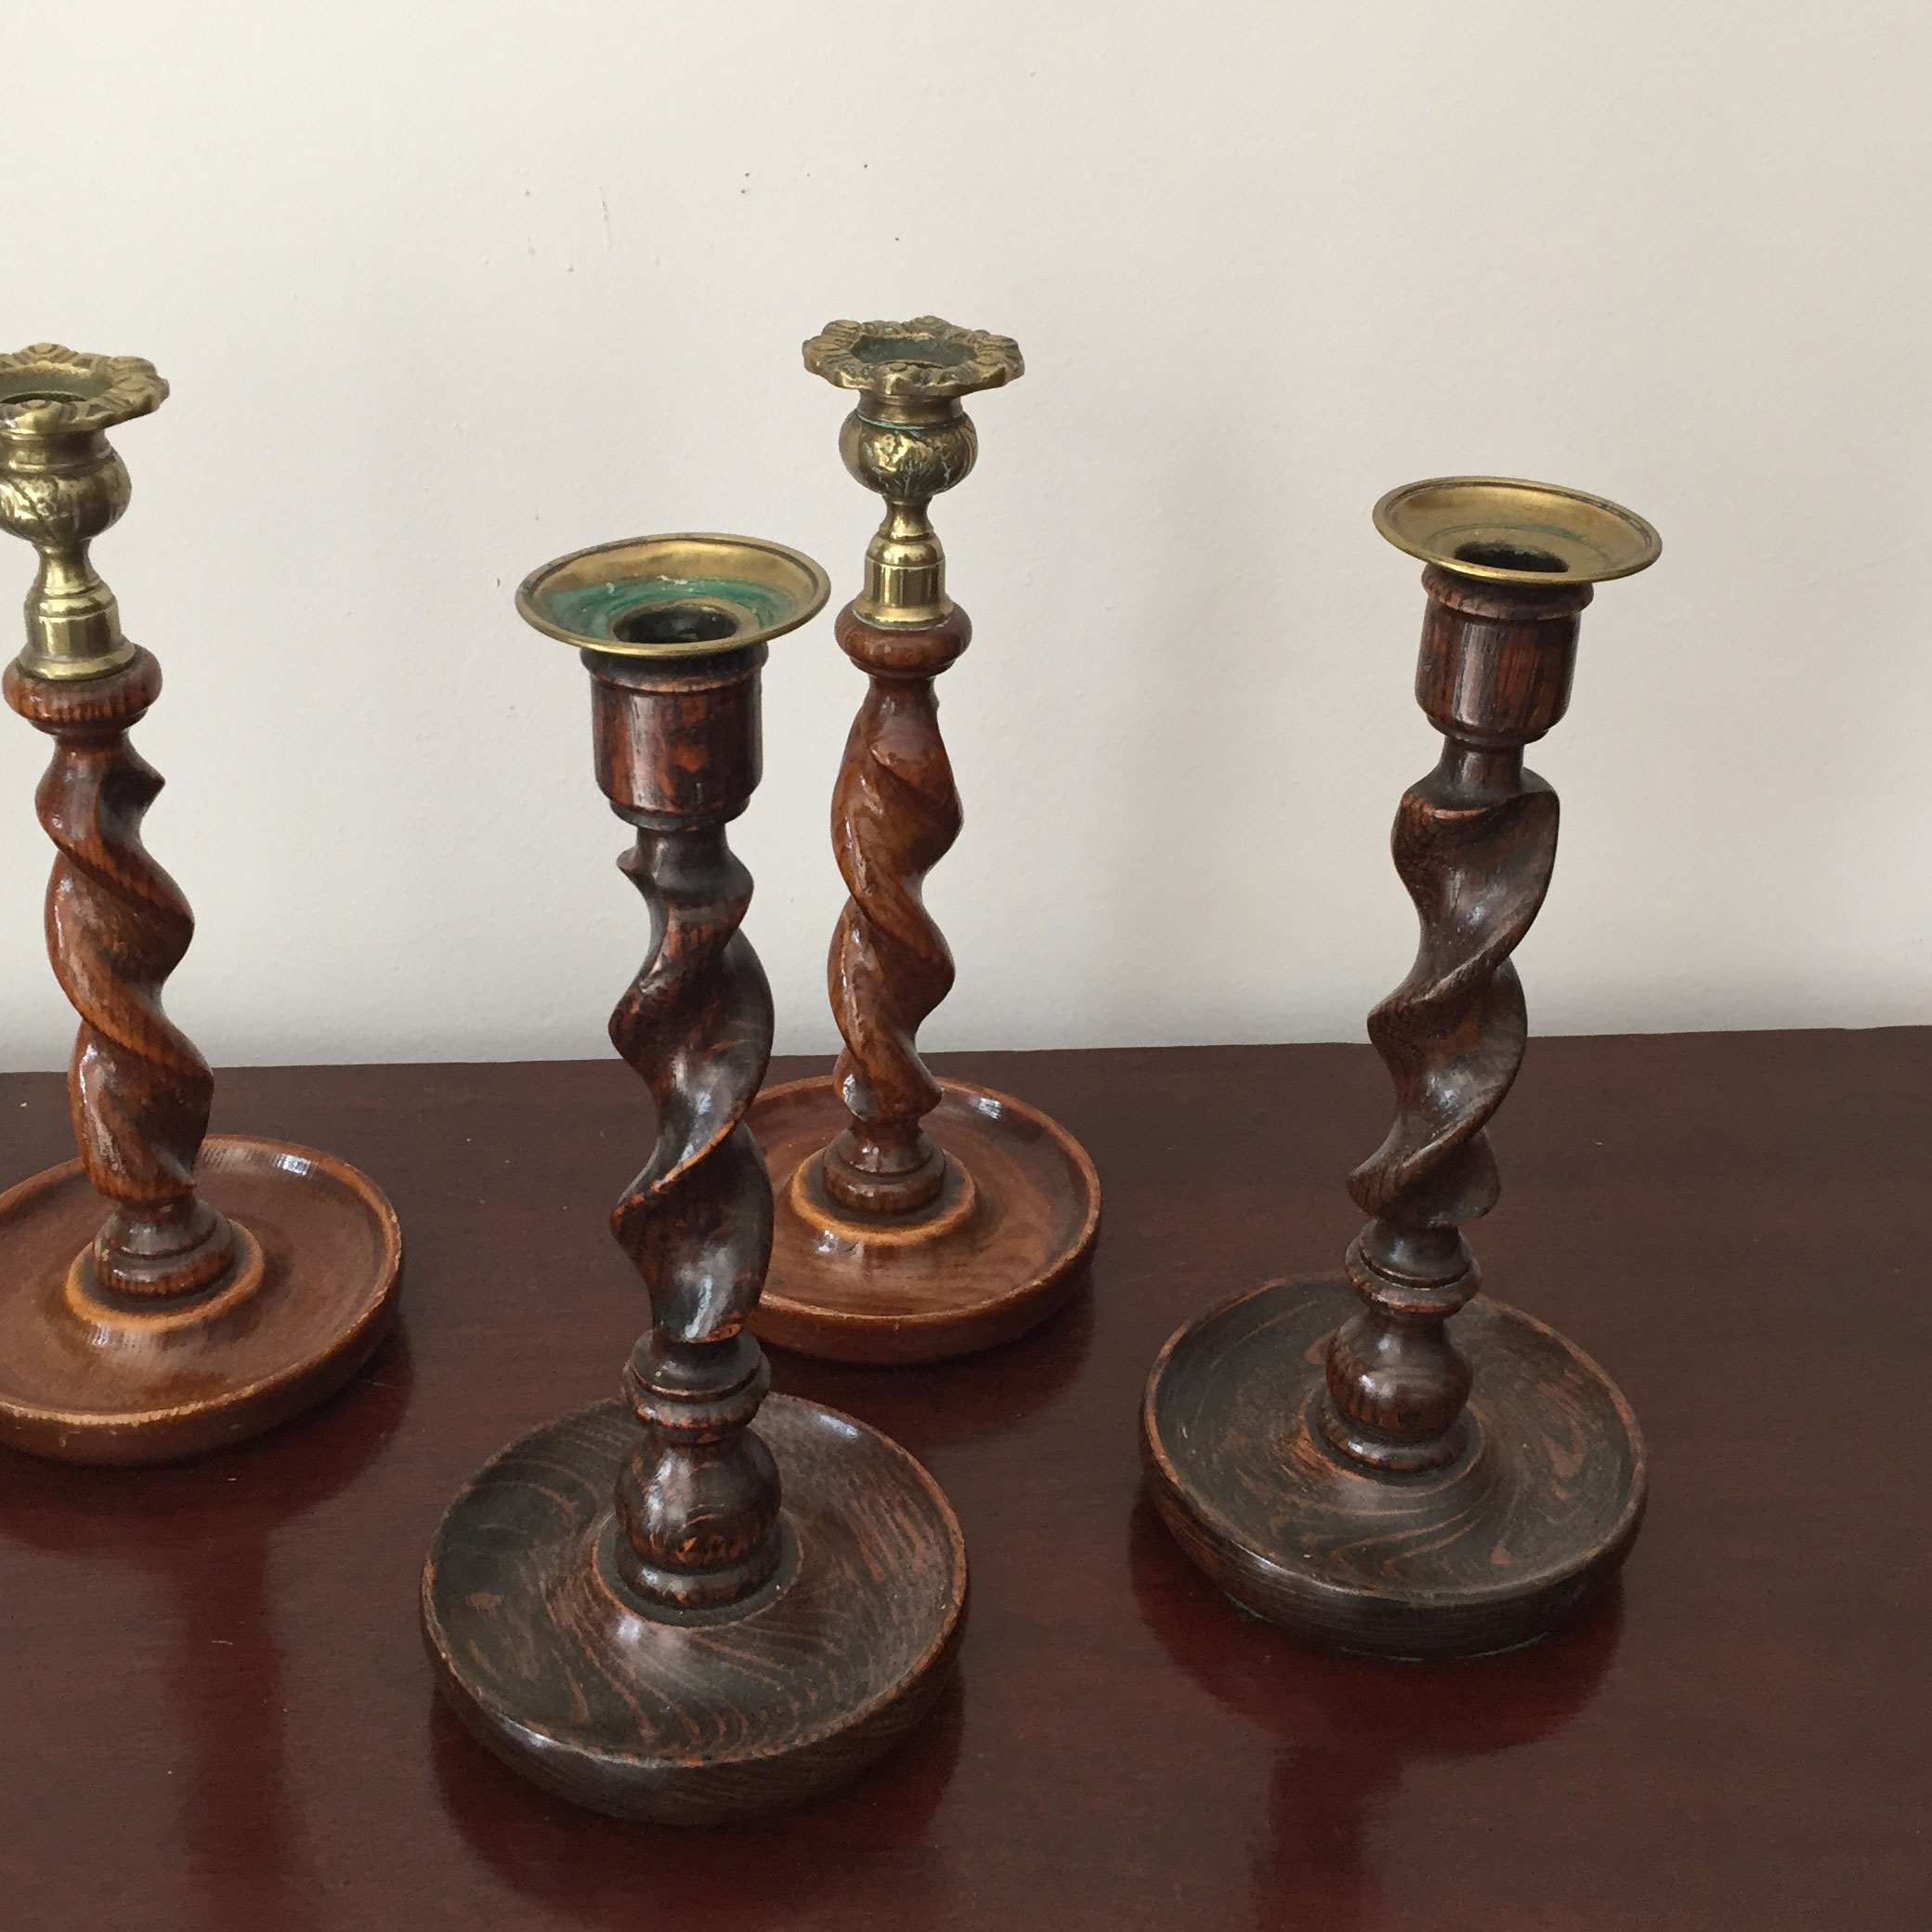 Two Pairs of Barley Twist Candlesticks – Boyd's Antiques